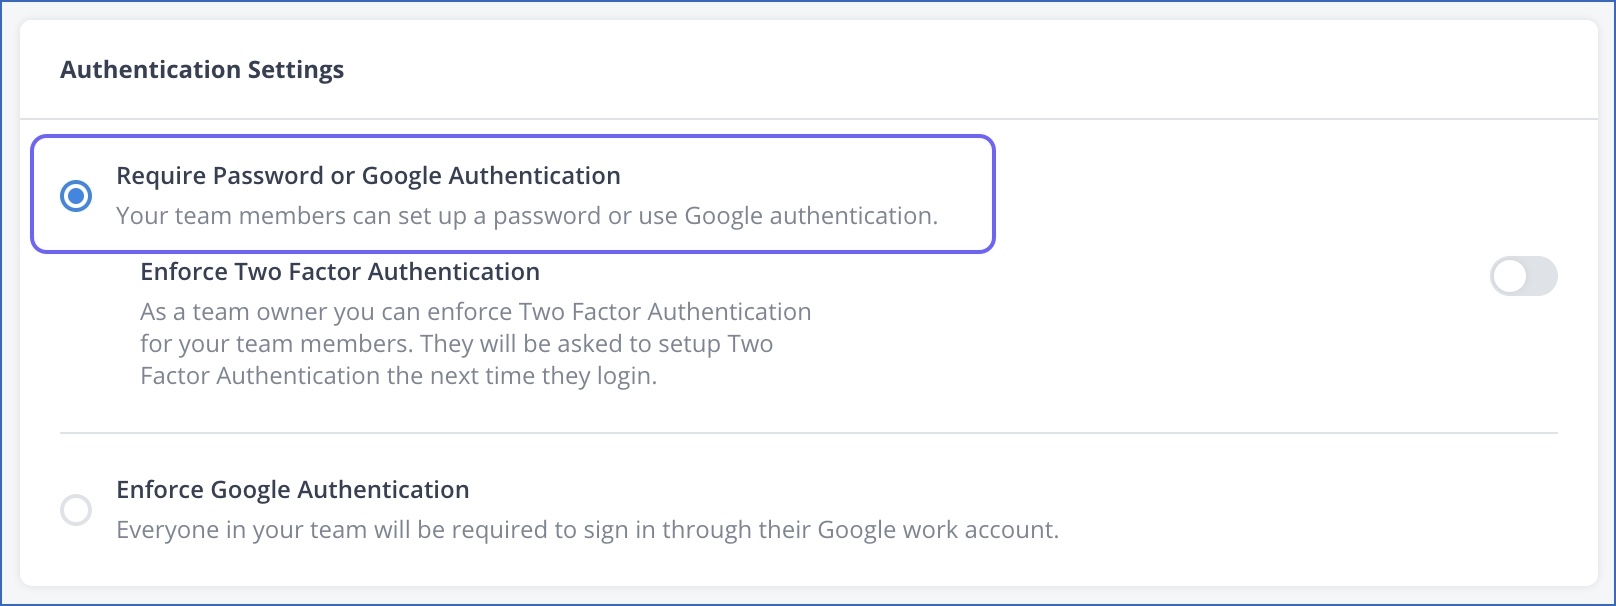 Require password or Google Authentication